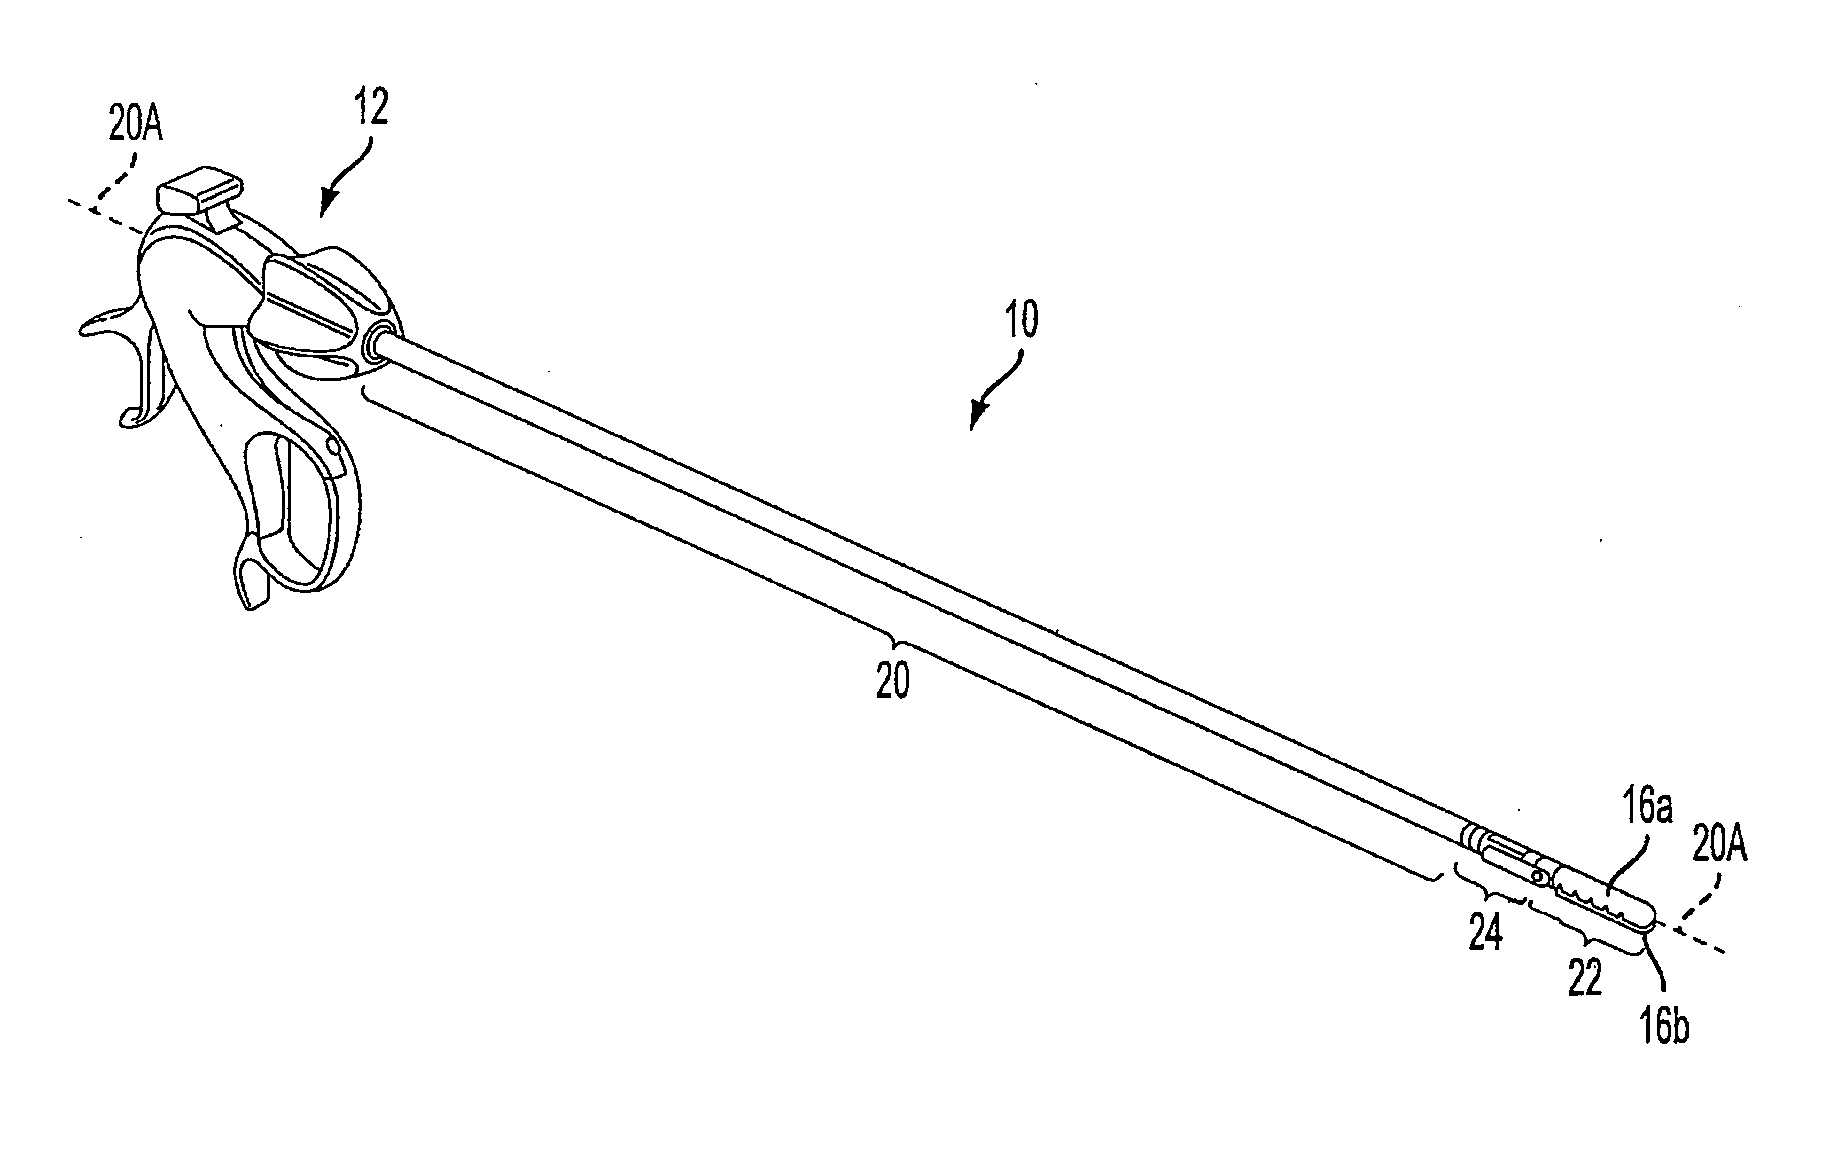 Laparoscopic devices with articulating end effectors